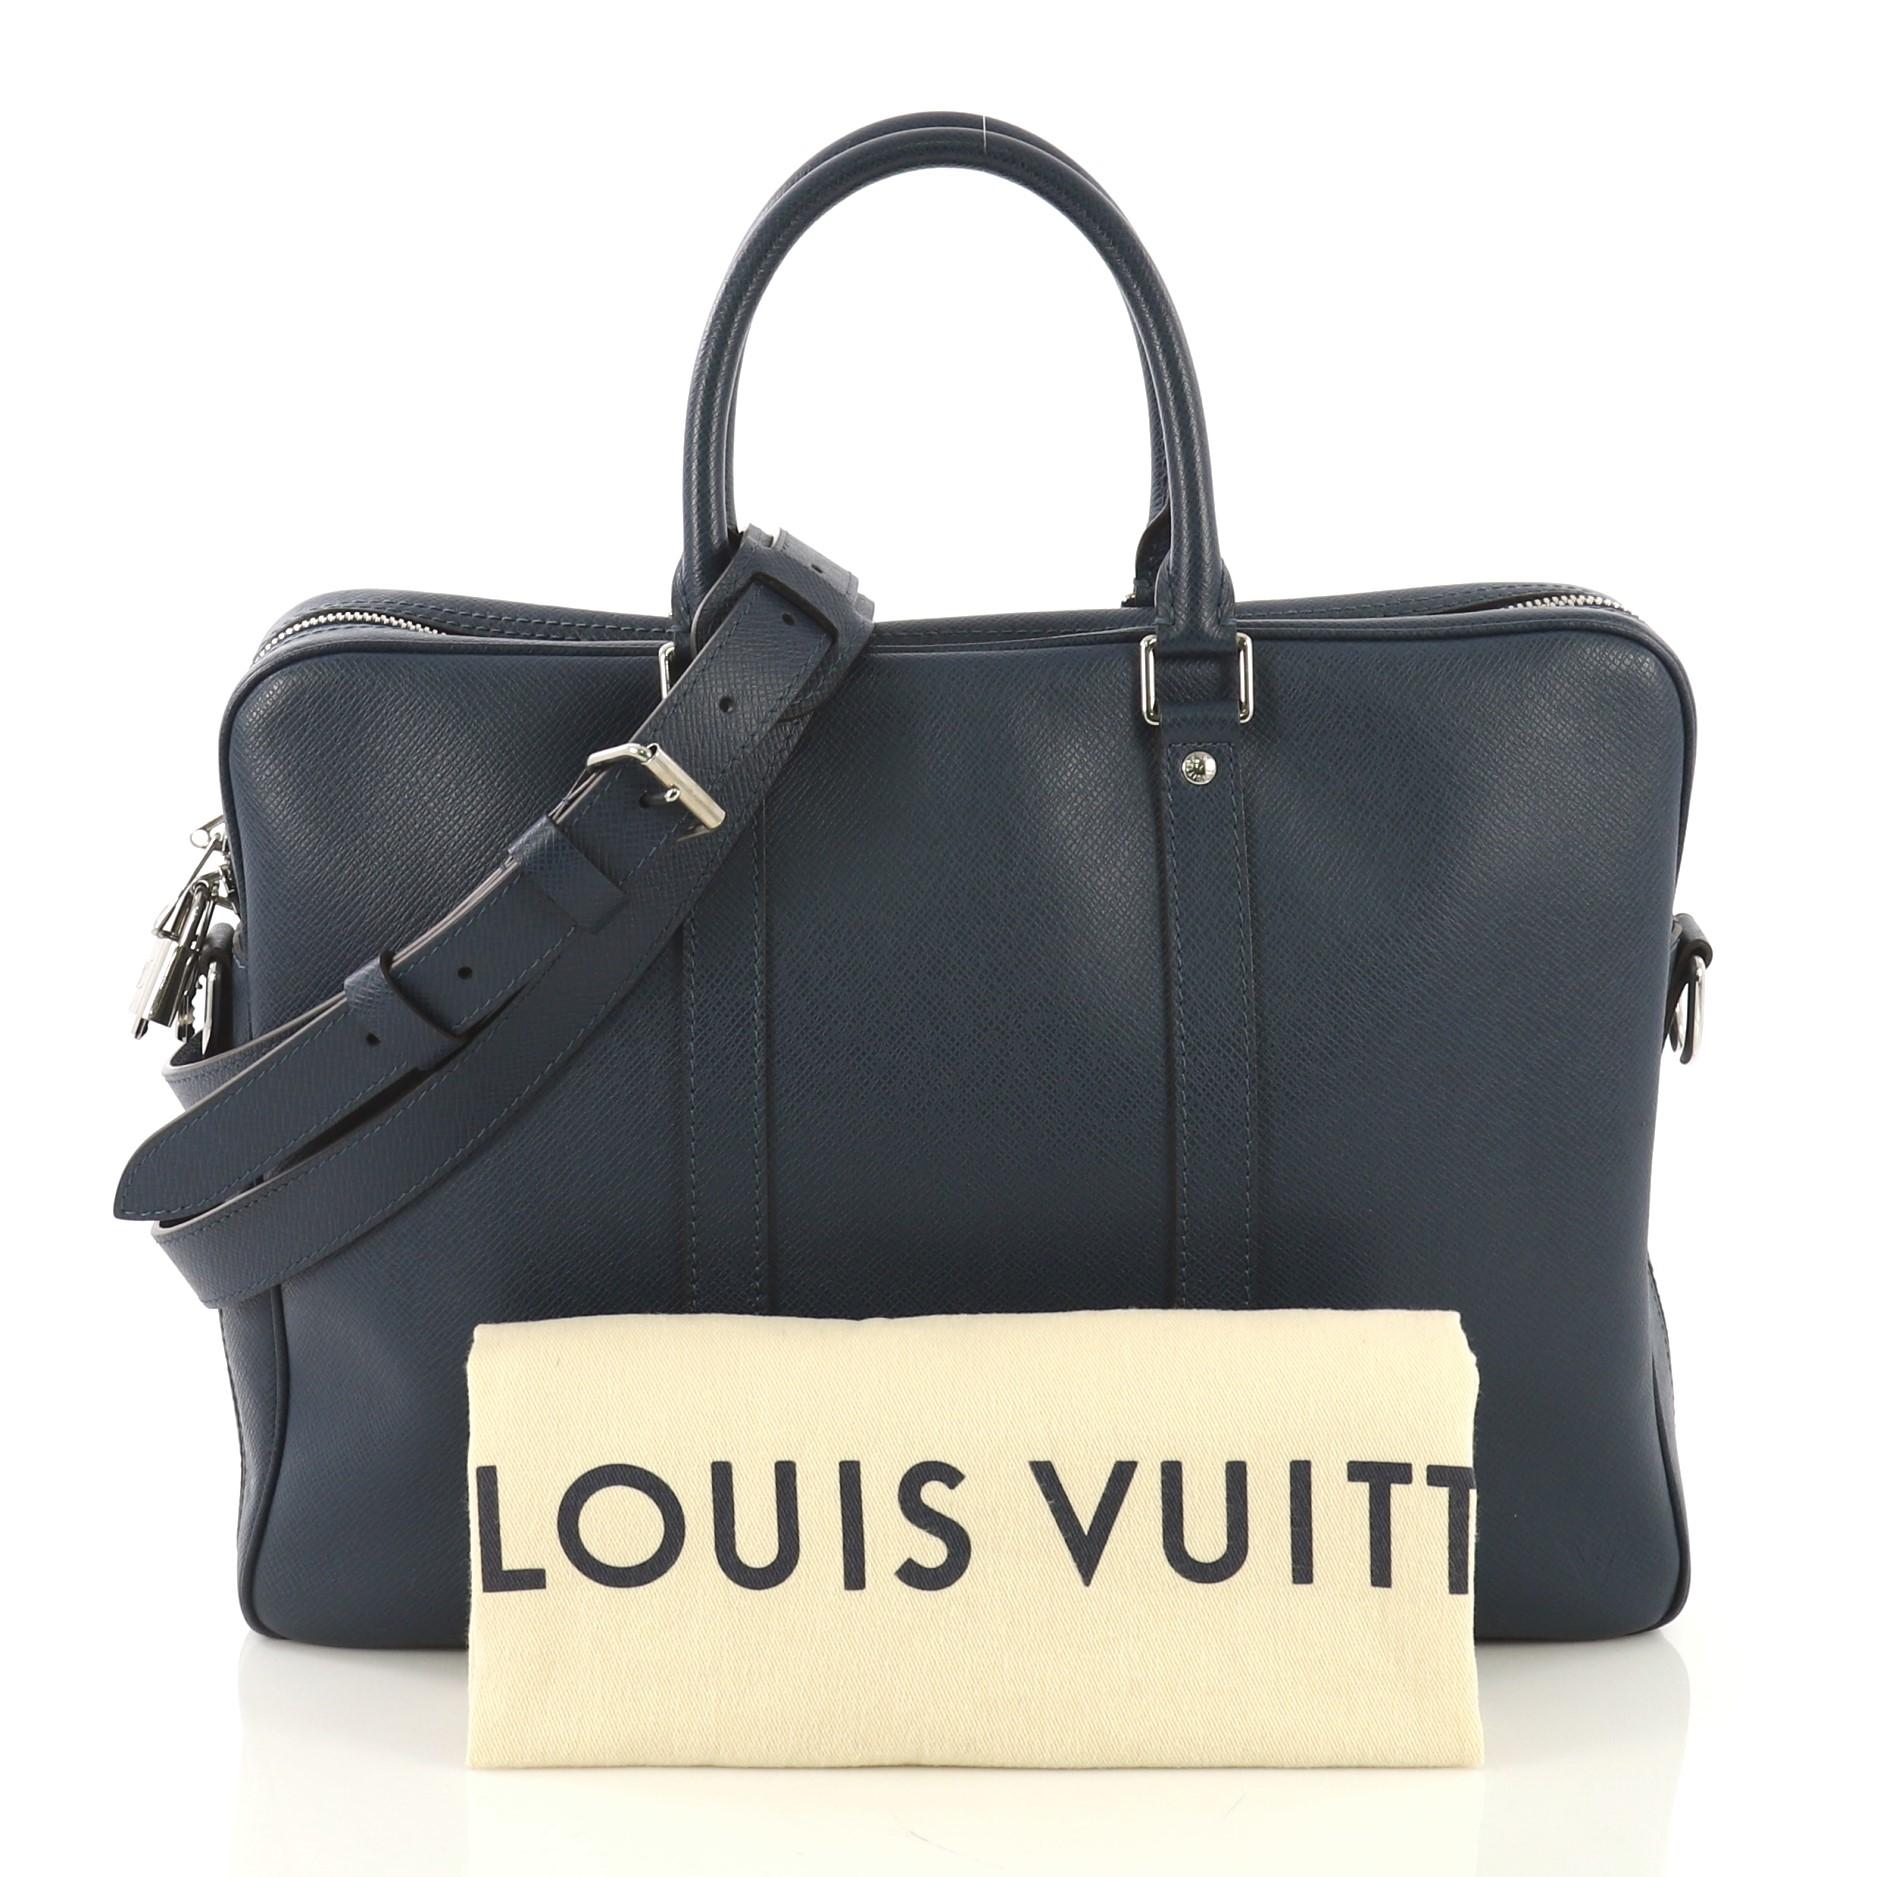 This Louis Vuitton Porte-Documents Voyage Briefcase Taiga Leather PM, crafted from blue taiga leather, features dual rolled handles and silver-tone hardware. Its two-way zip closure opens to a blue fabric interior with slip pockets. Authenticity